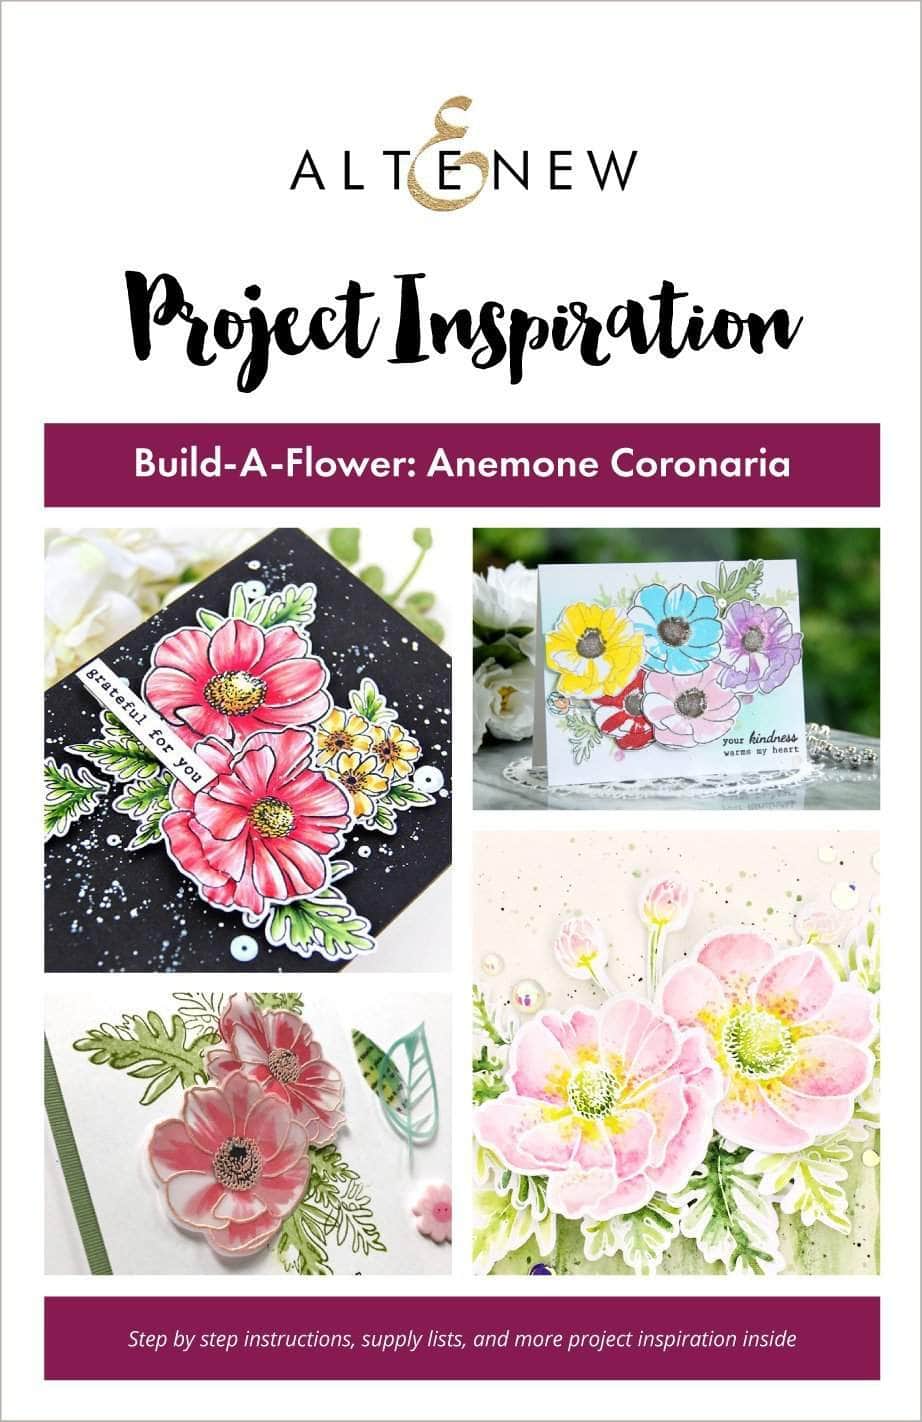 Printed Media Build-A-Flower: Anemone Coronaria Project Inspiration Guide